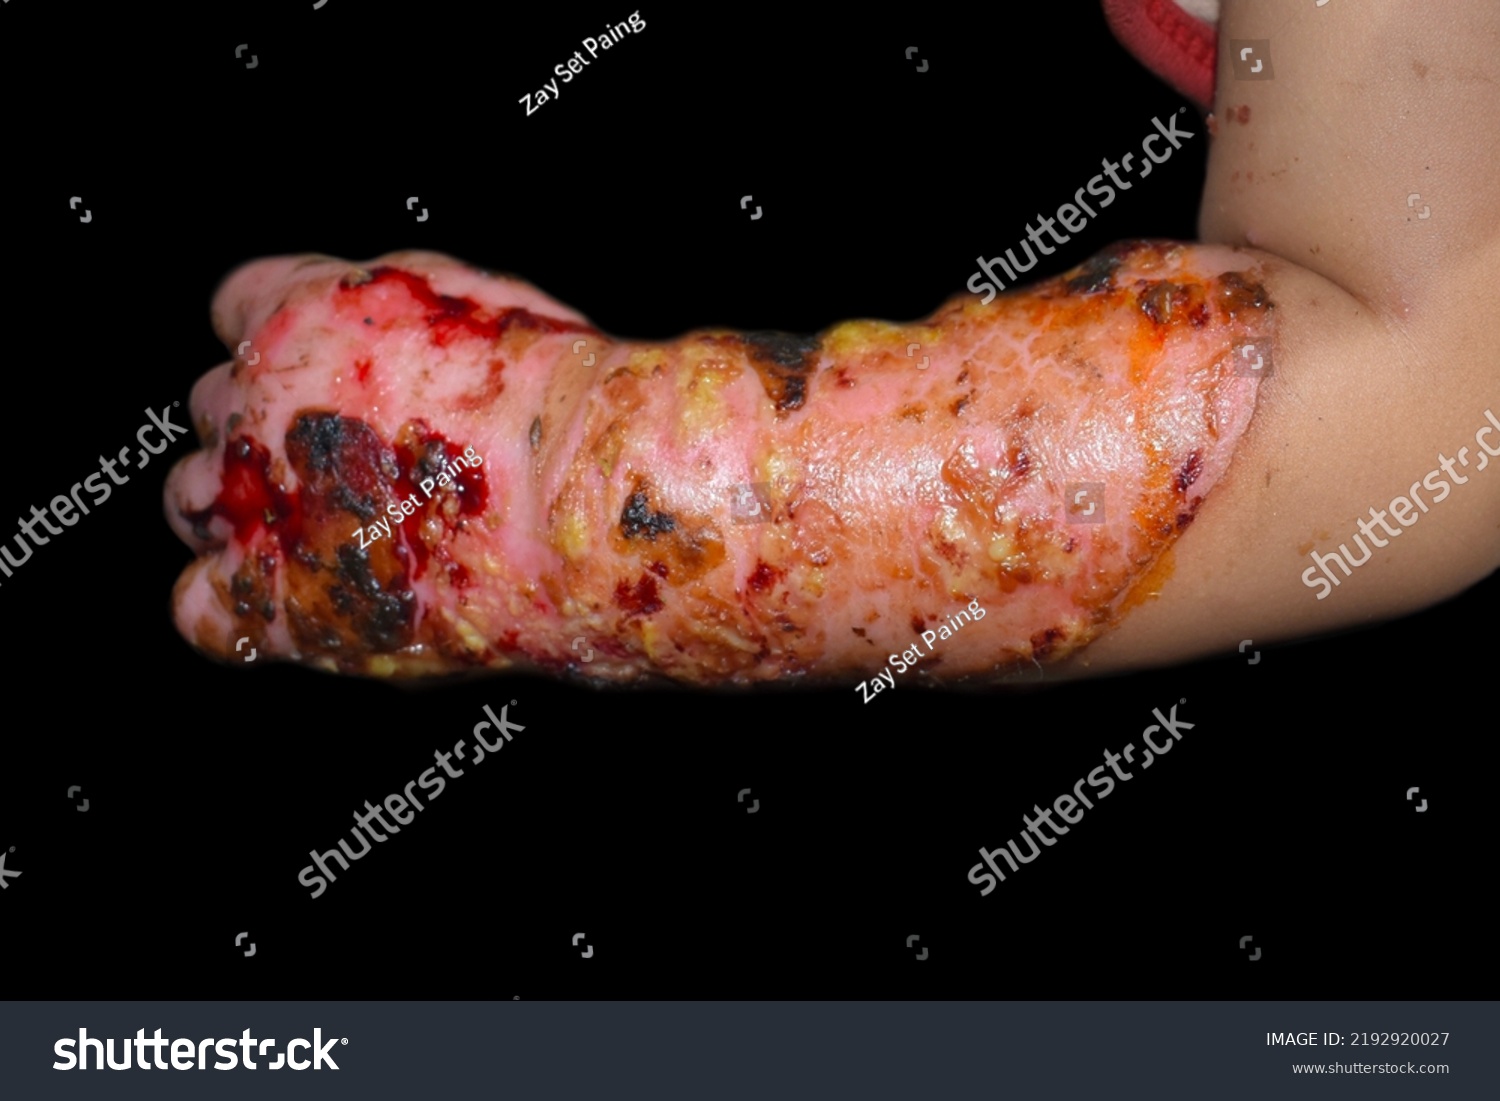 Burn wound surrounded by scabs and exsudates in hand and forearm of Southeast Asian child. Closeup view. #2192920027